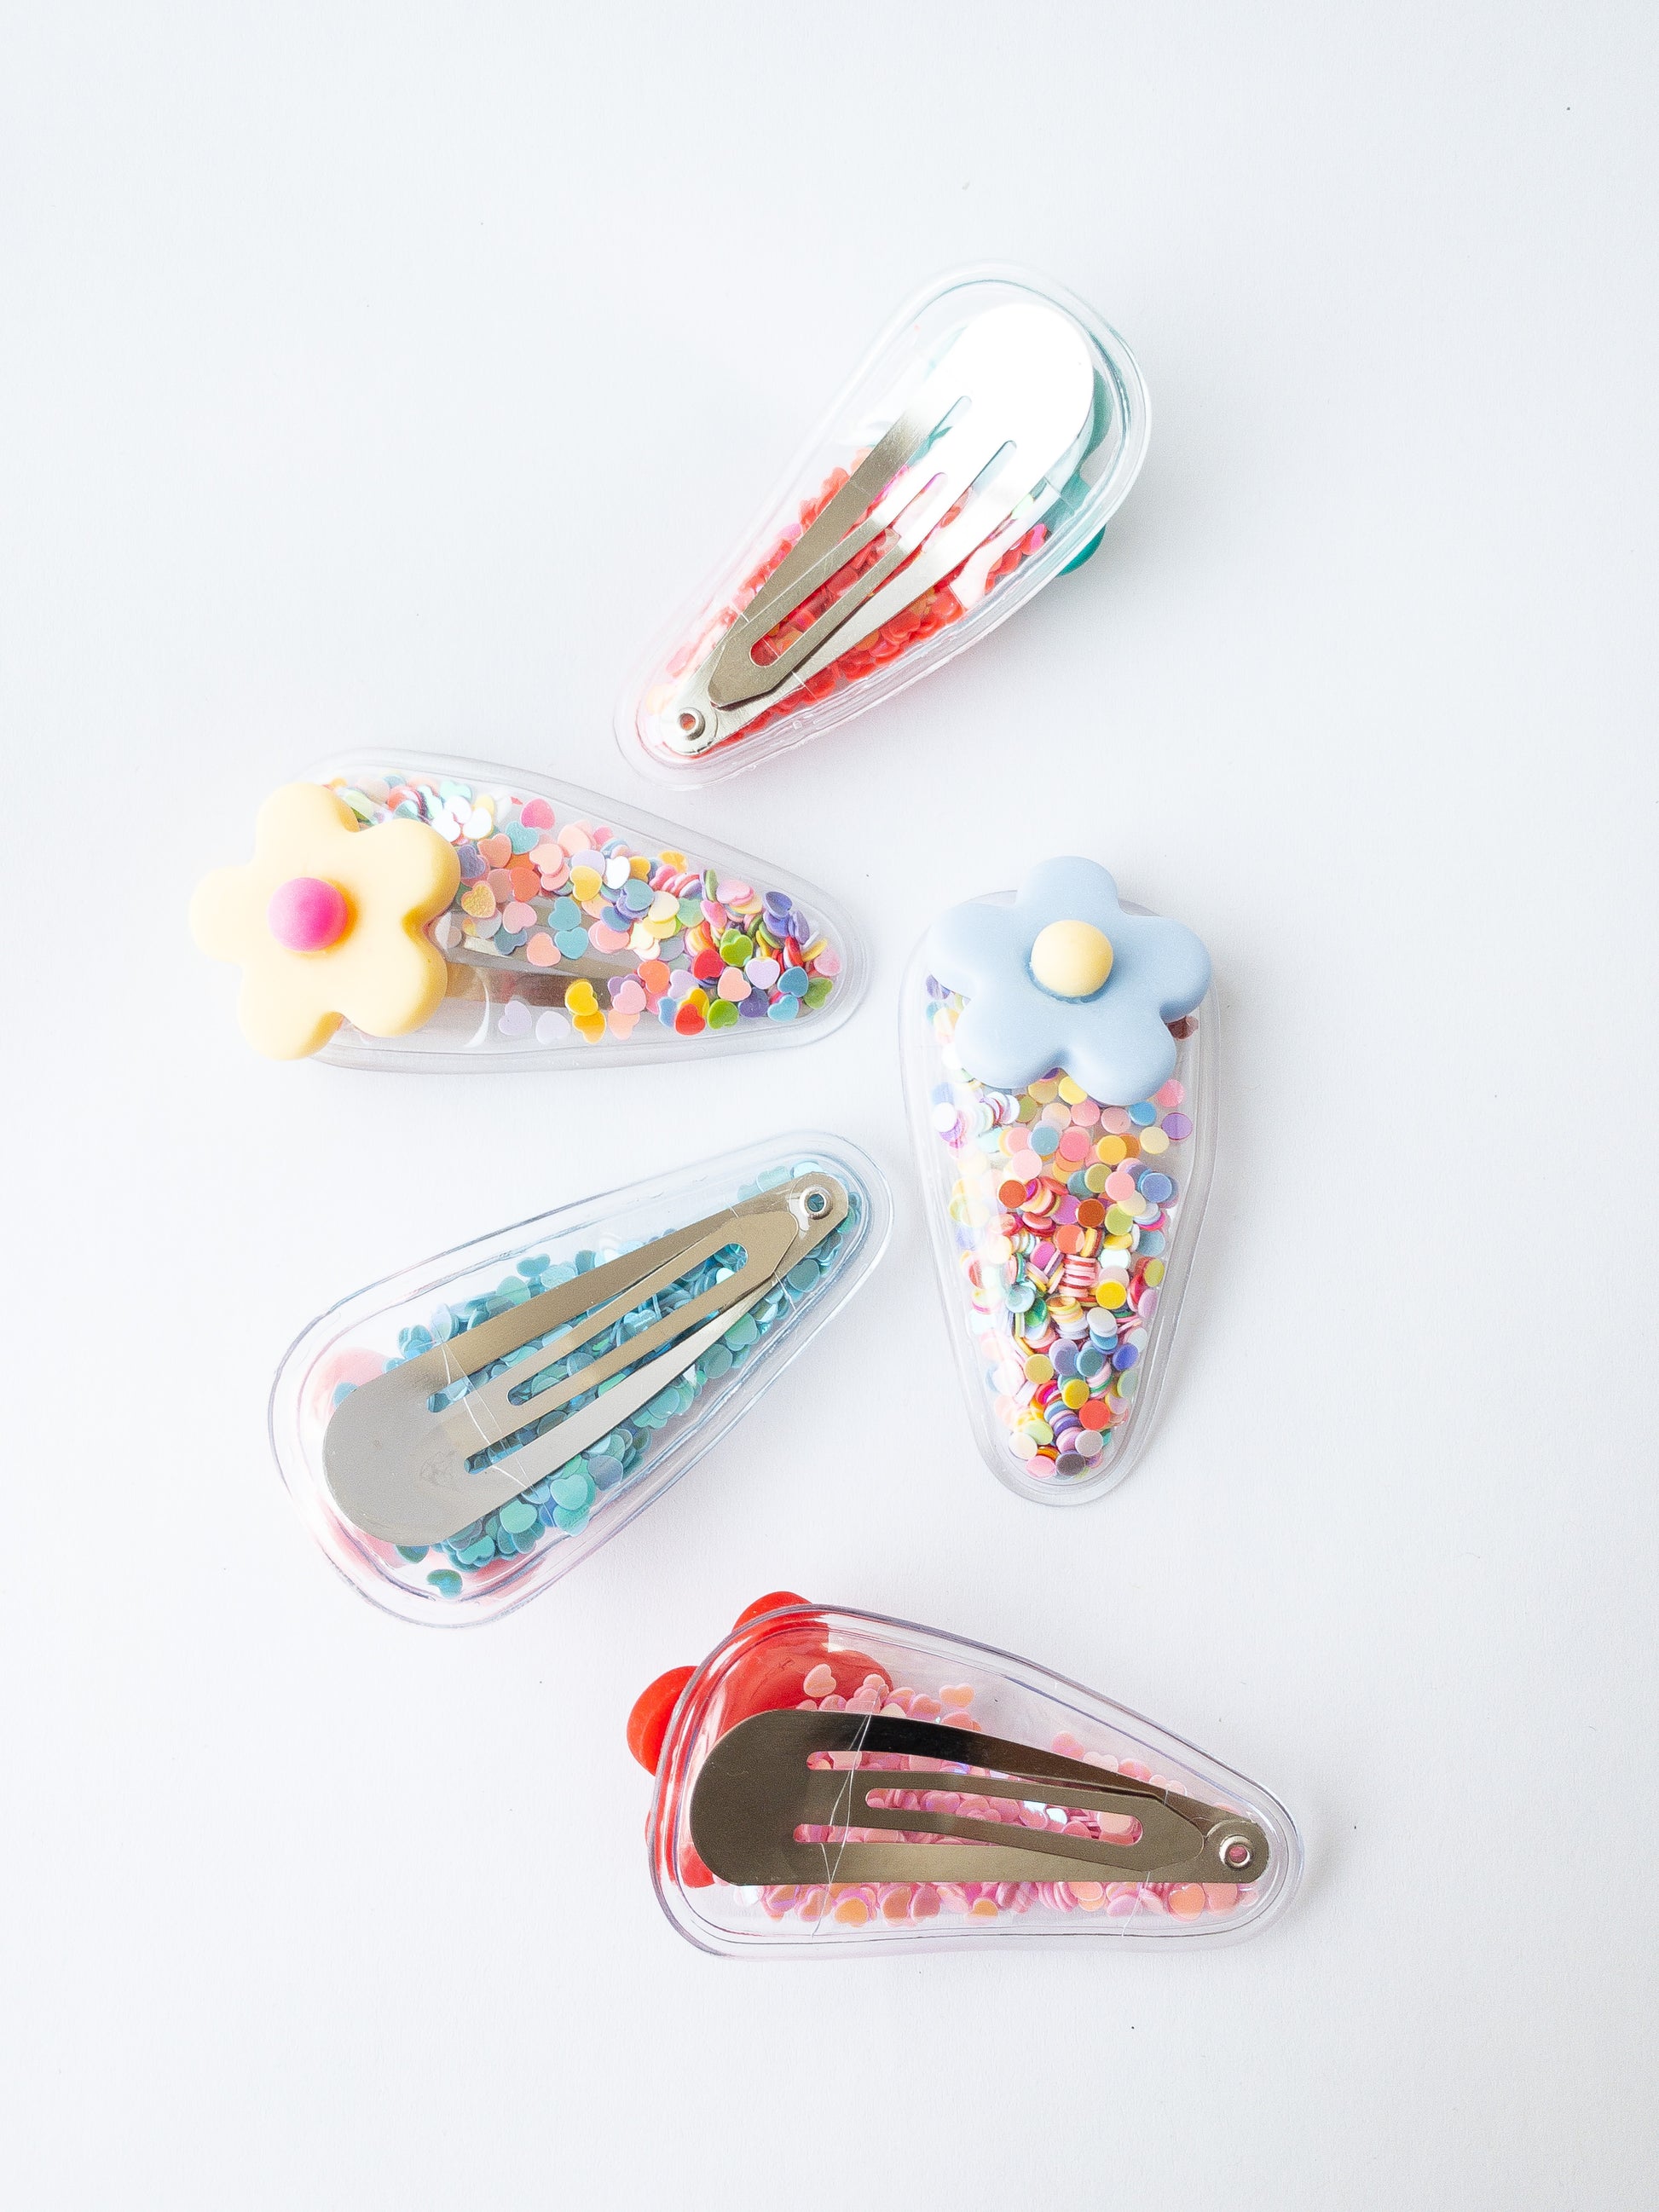 Our signature shaker hair clips but with flowers! Each snap clip is a triangular pouch filled with the most fun confetti--hearts and circles. And to top it all off, there is a pretty flower on the end of each clip. These are sure to make anyone smile!